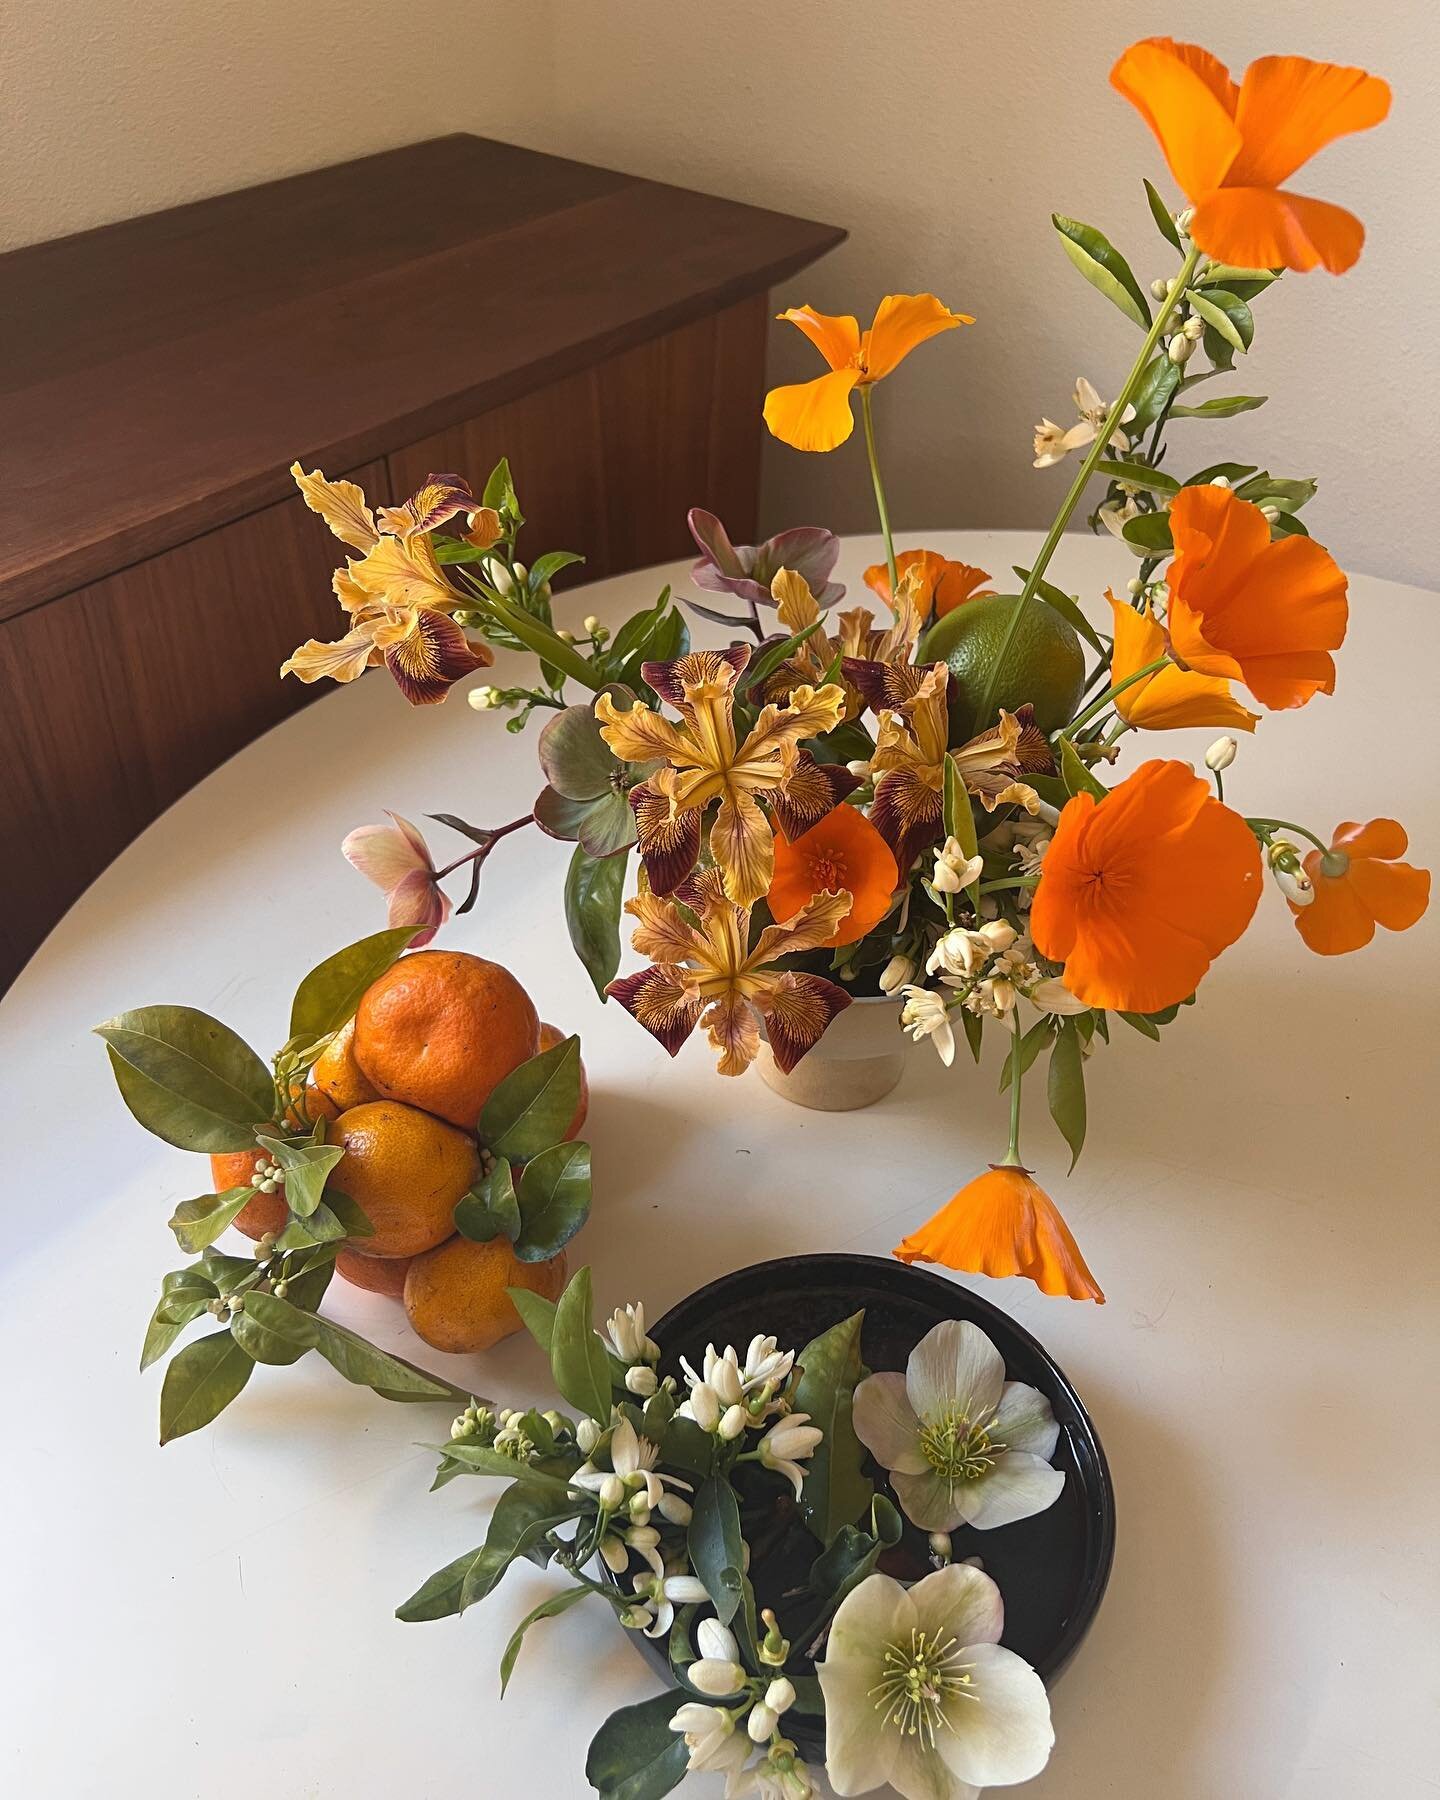 Orange blossoms, hellebores, a chunk of tangerines (7 fruits on that one branch 🫠), native Iris and poppies